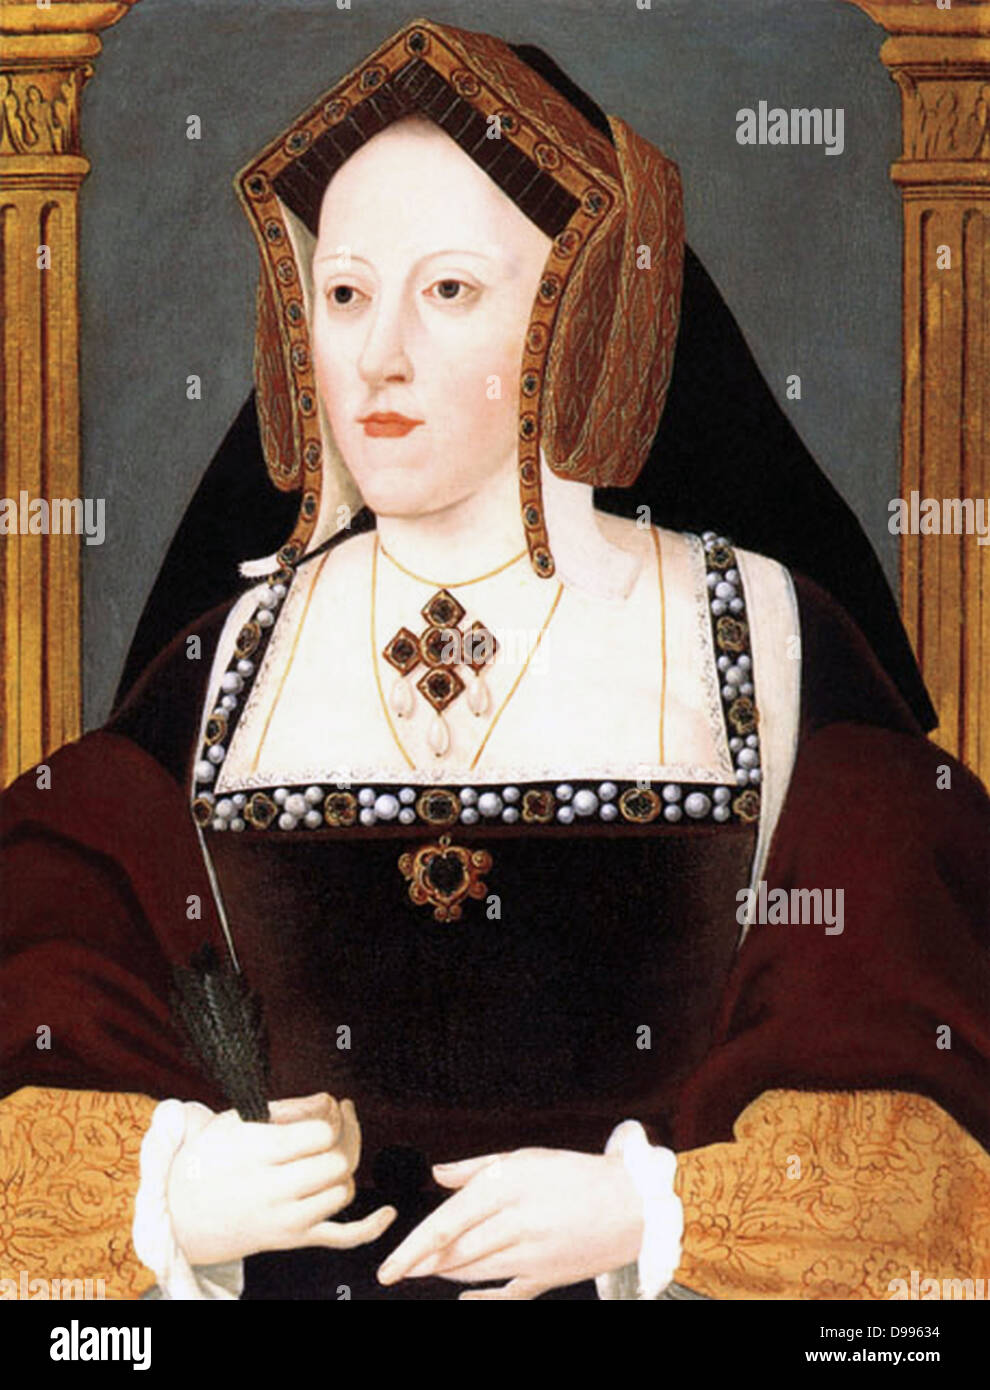 Katherine of Aragon (16 December 1485 – 7 January 1536),   Castilian Infanta Catalina de Aragón y Castilla, was the   Queen of England as the first wife of Henry VIII of England. Stock Photo